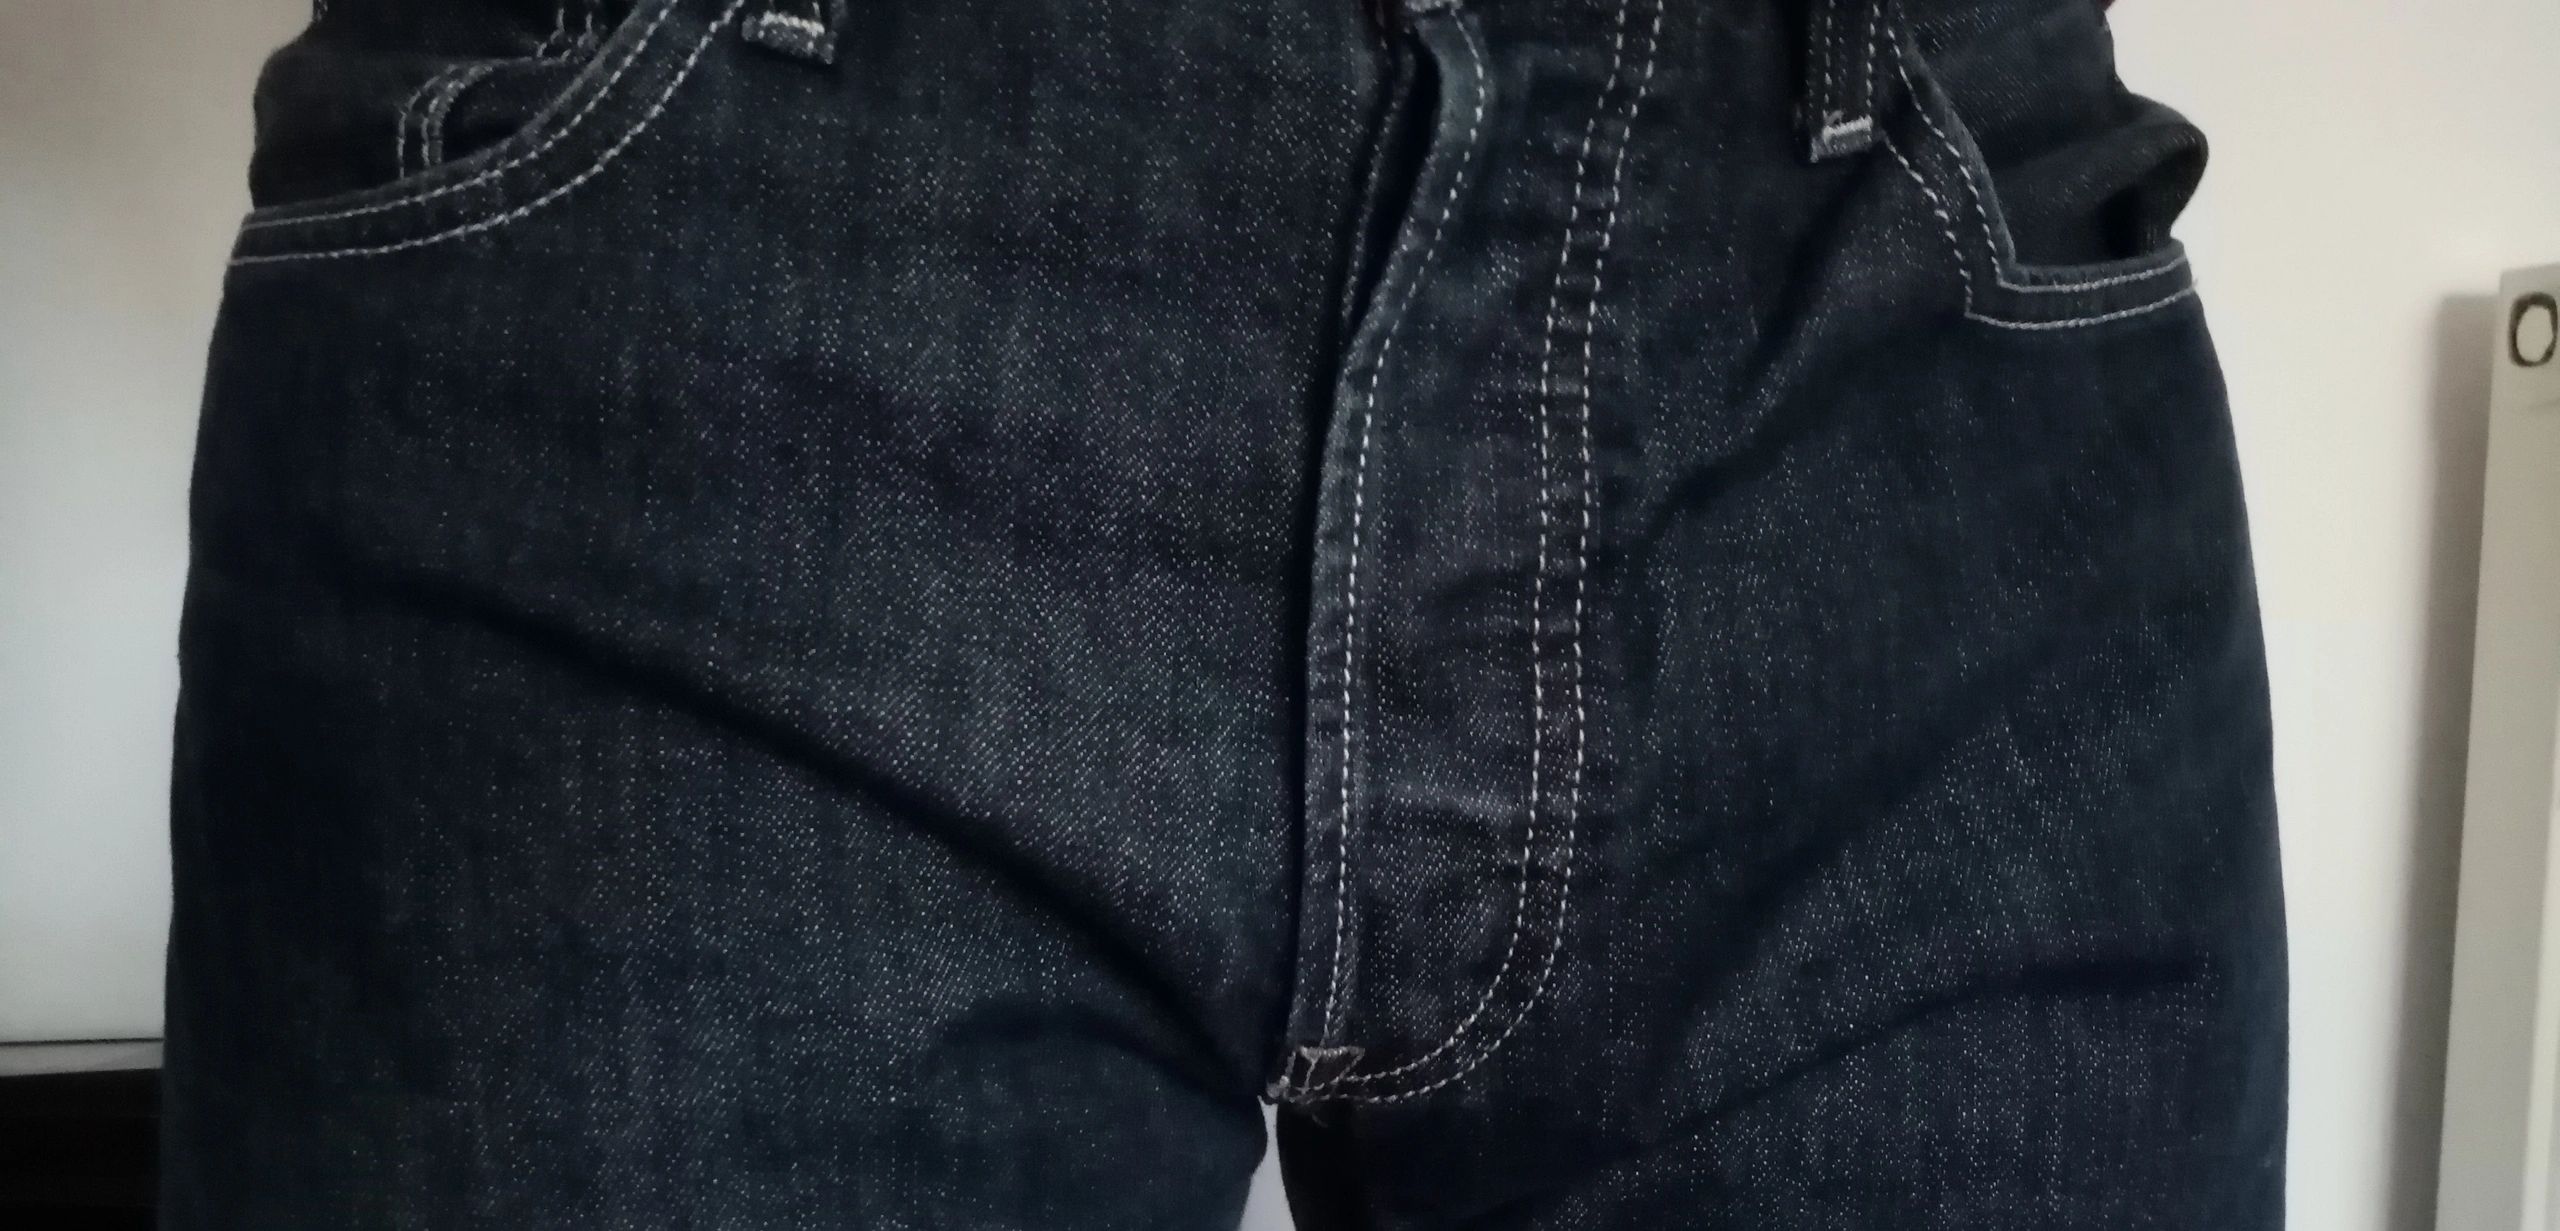 James' at SkinMap's crotch in blue jeans